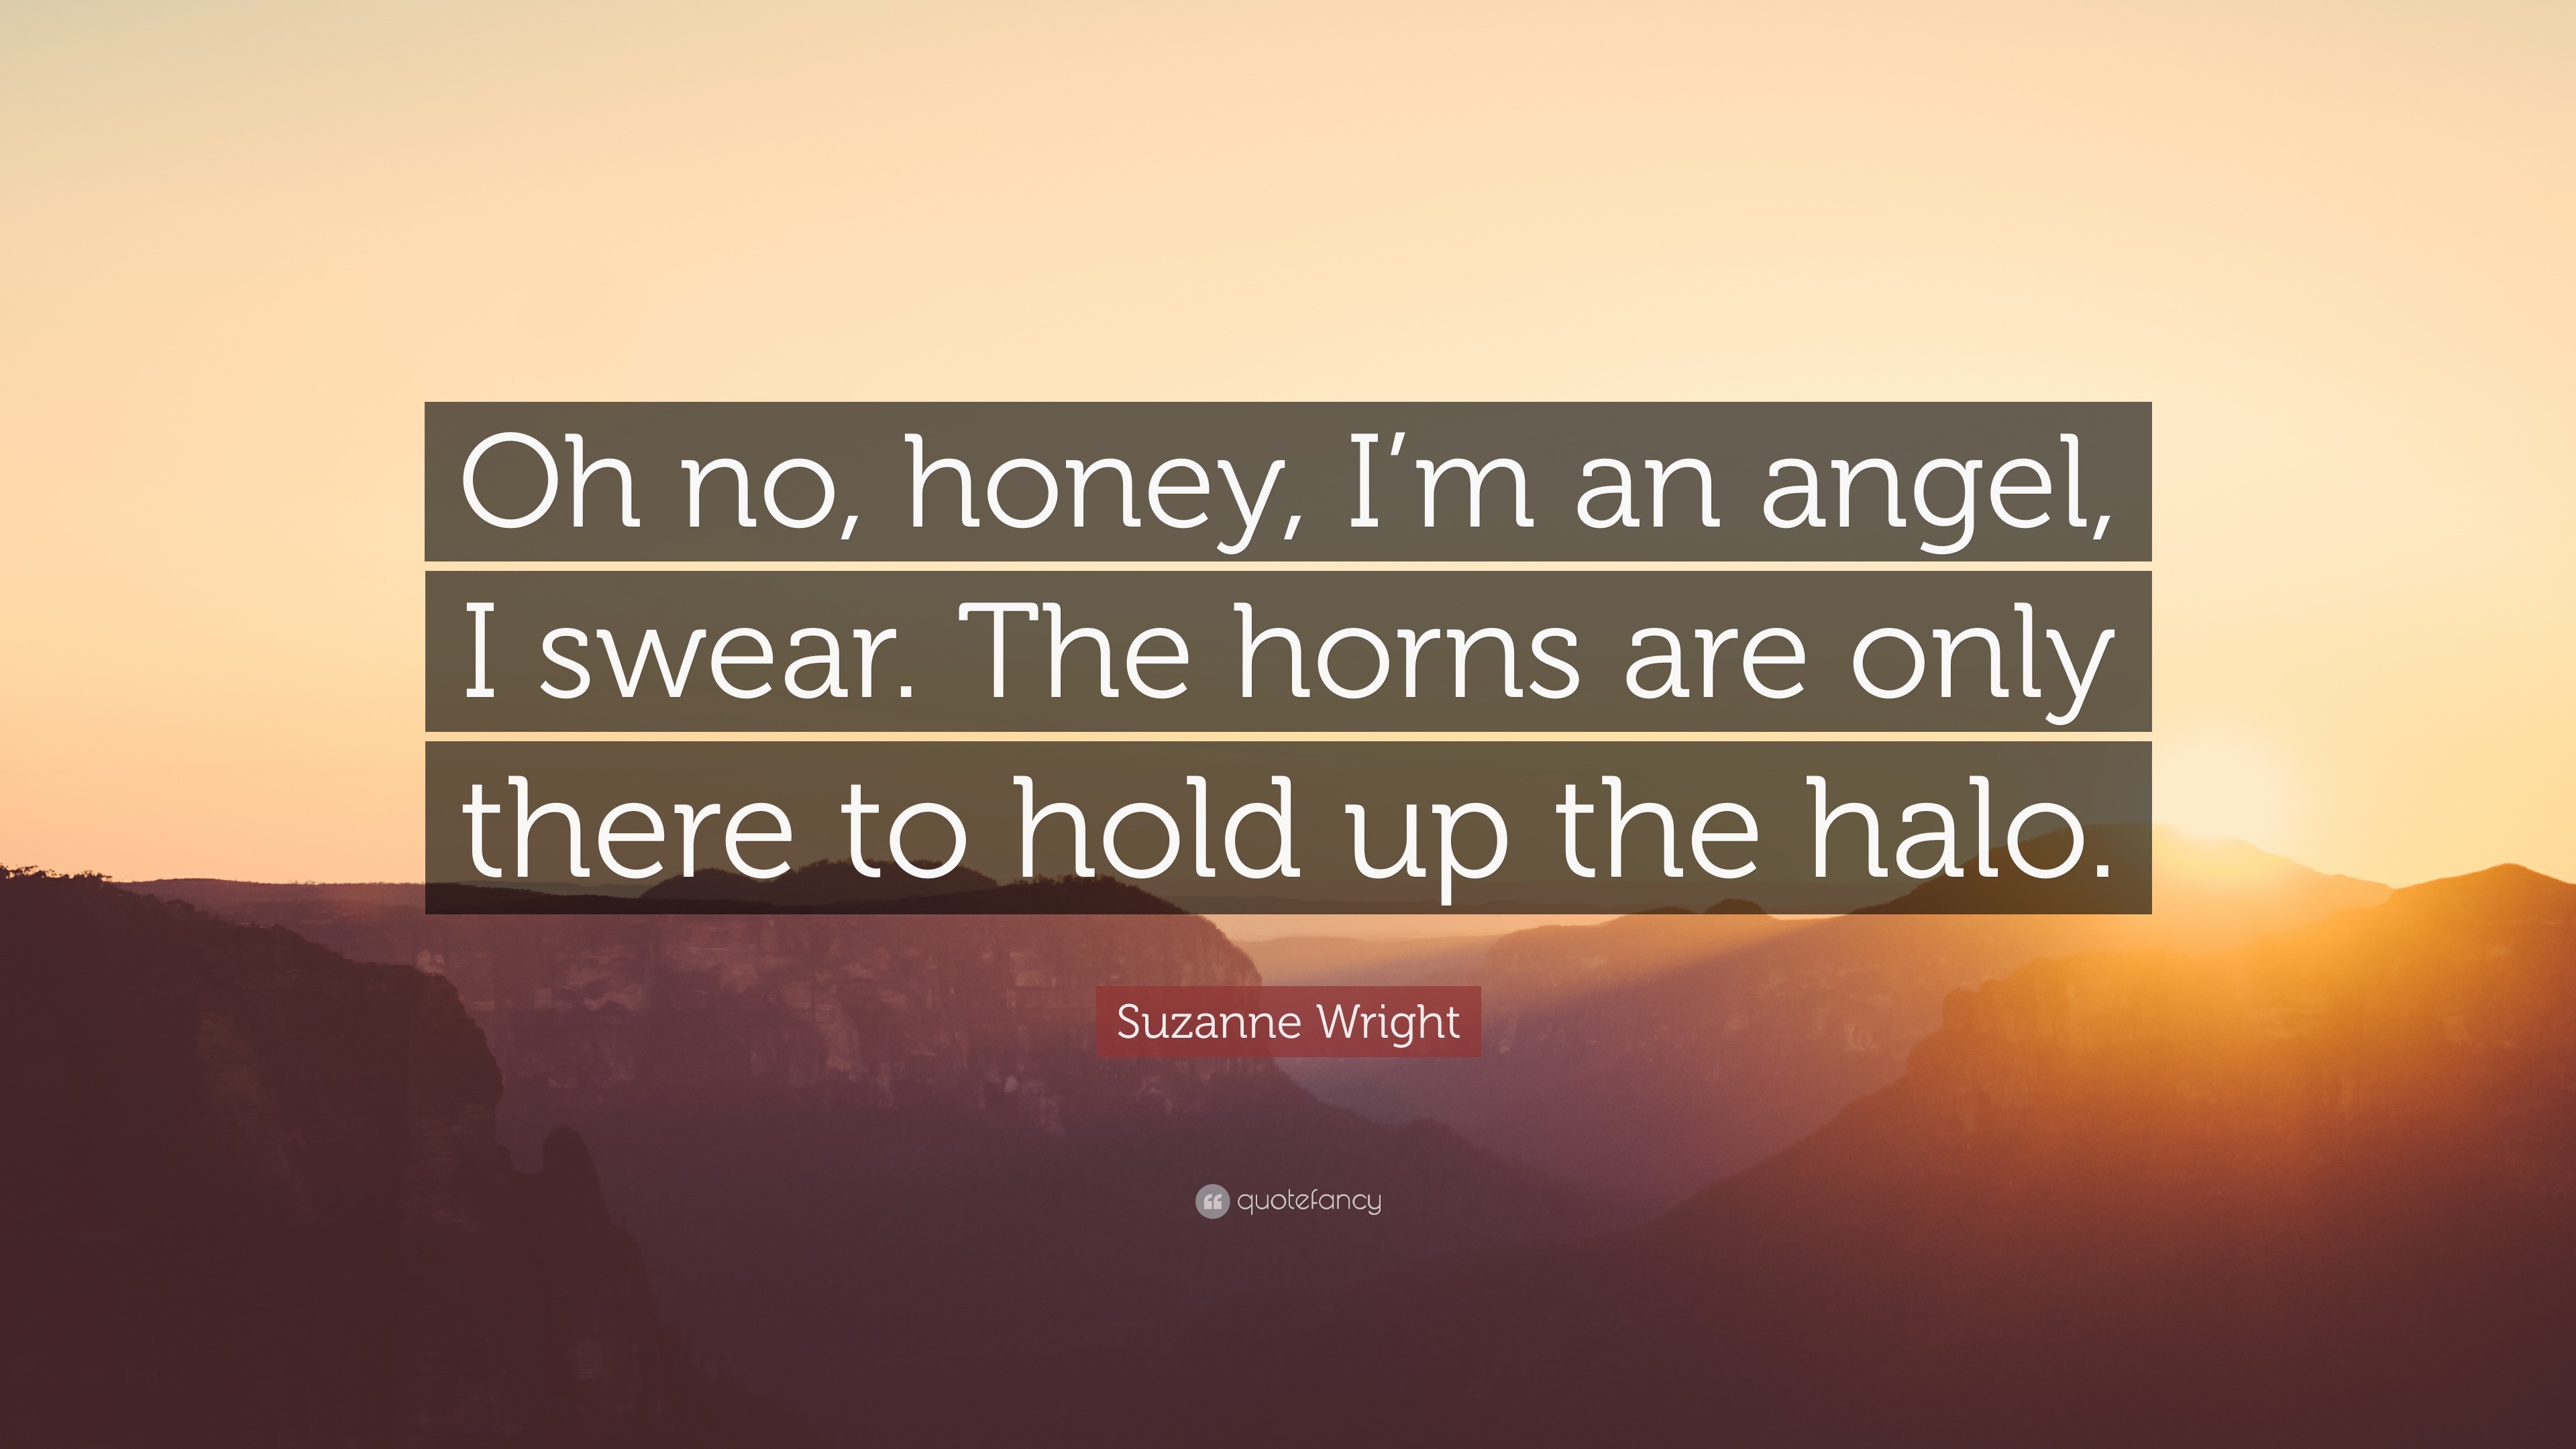 https://quotefancy.com/media/wallpaper/3840x2160/1689513-Suzanne-Wright-Quote-Oh-no-honey-I-m-an-angel-I-swear-The-horns.jpg